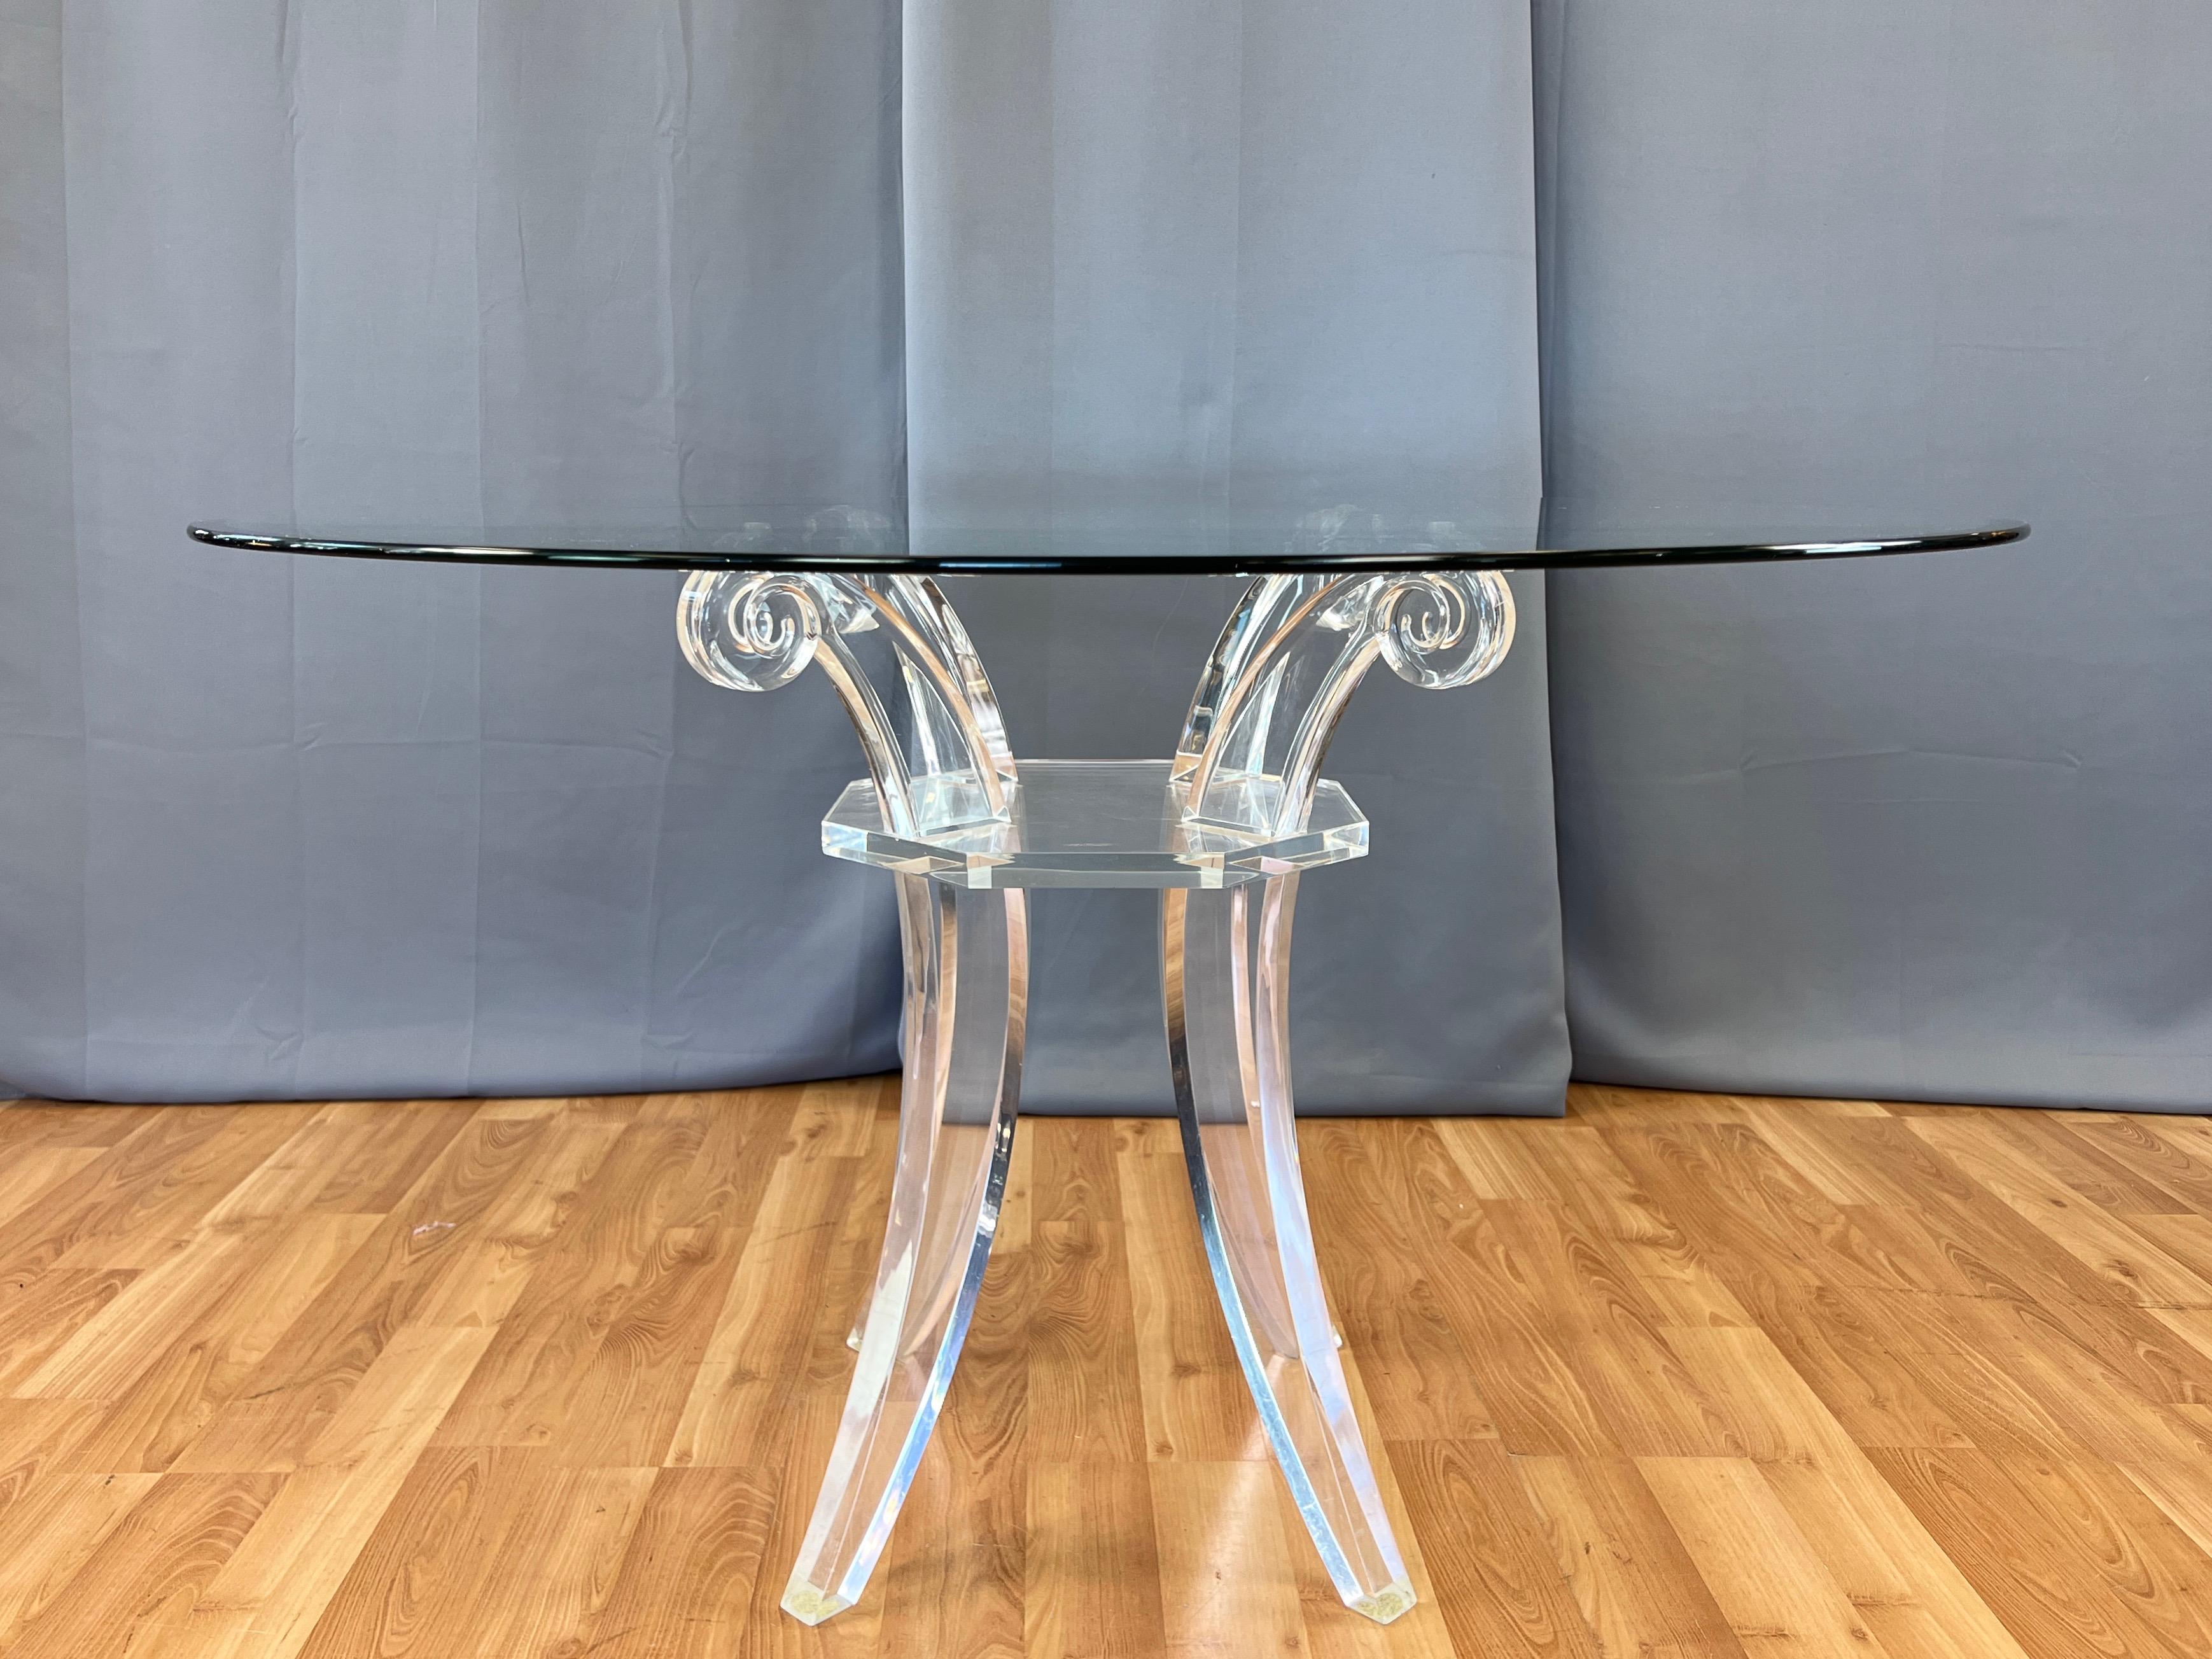 A glamorous and uncommon circa 1980 Charles Hollis Jones-style saber leg lucite dining table with large round glass top.

Base comprised of crystal clear and thick solid lucite elements that display very high quality material and craftsmanship.